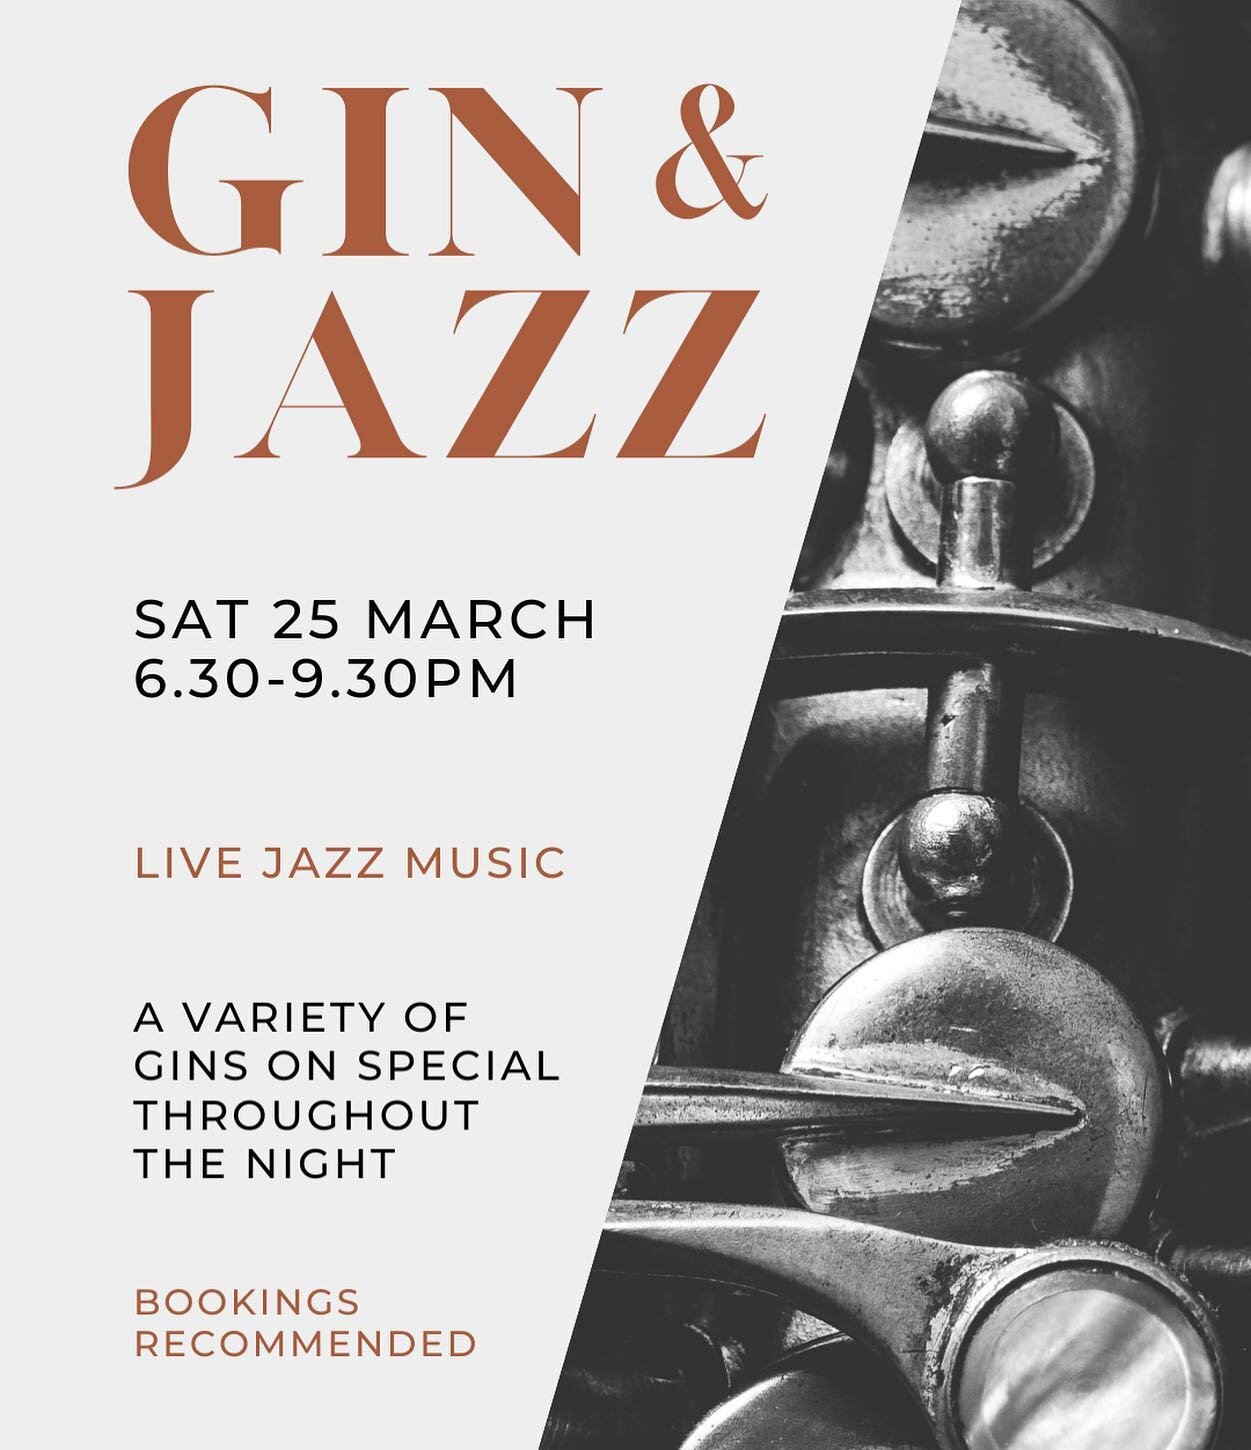 Gin and Jazz is back this month! We highly recommend booking in advance for a night of live jazz and gin specials 🎷